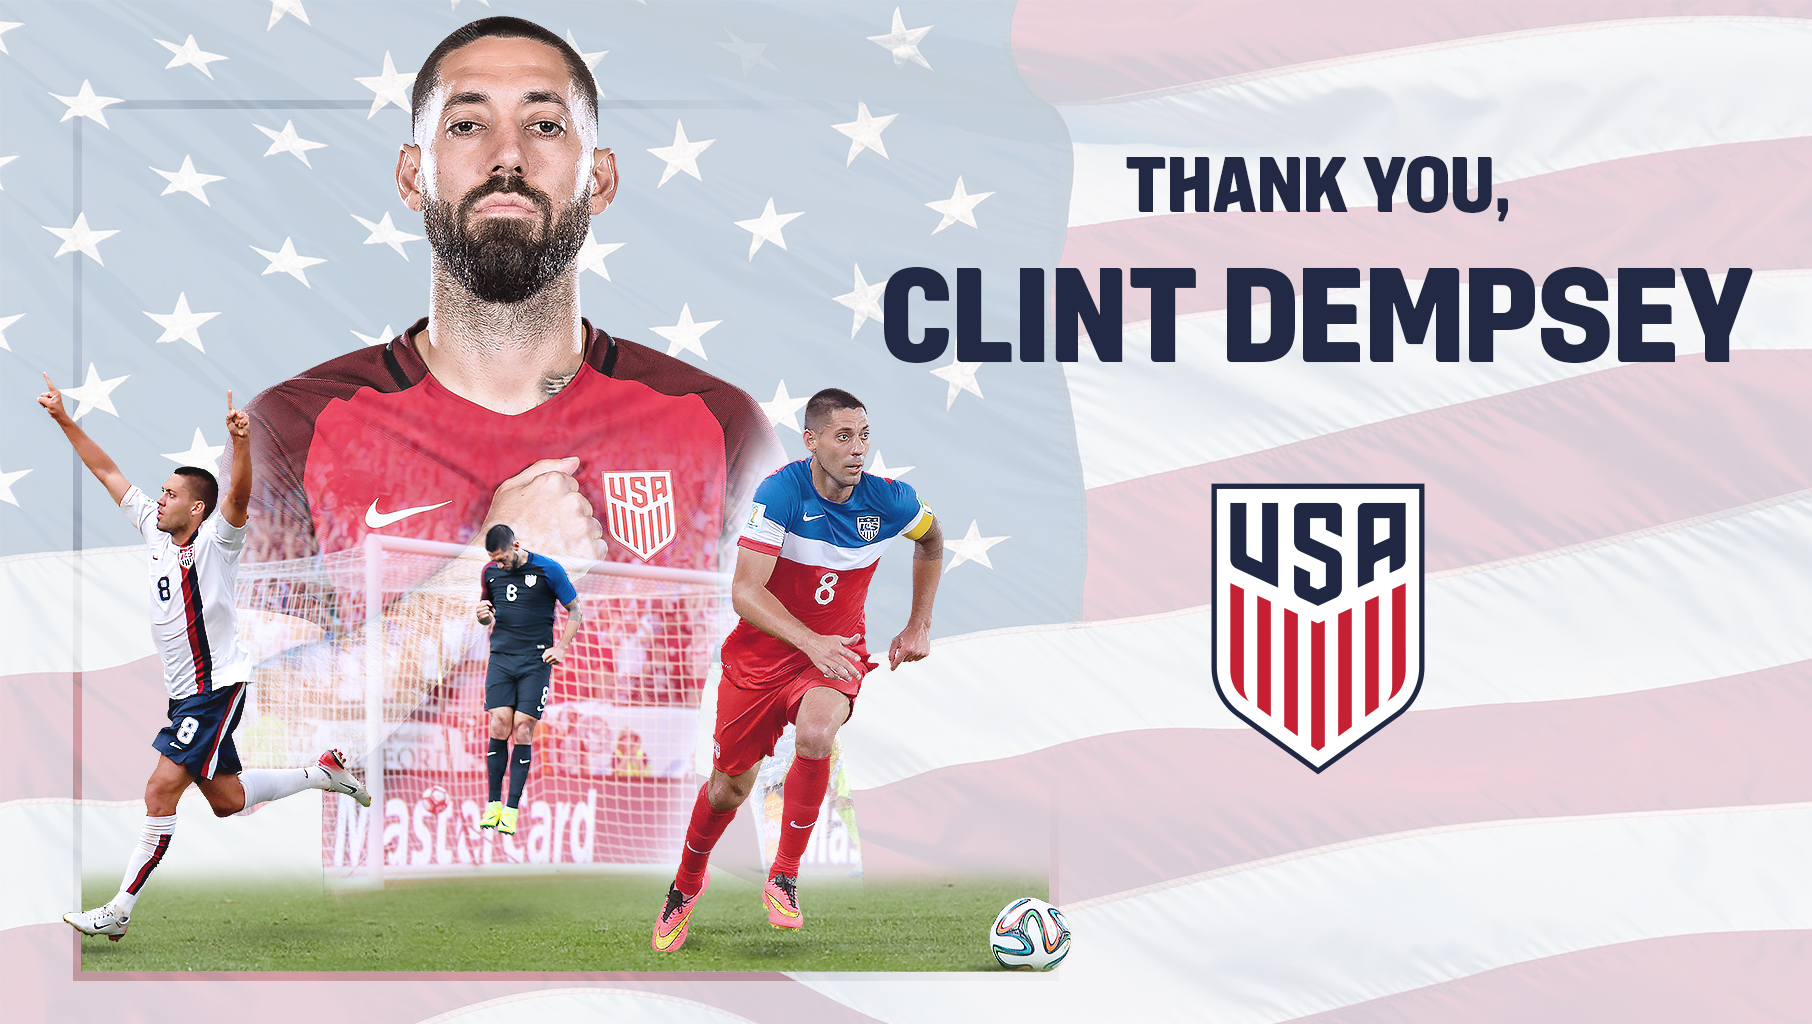 Clint Dempsey, the 'kid from Nacogdoches,' lifts U.S. soccer team